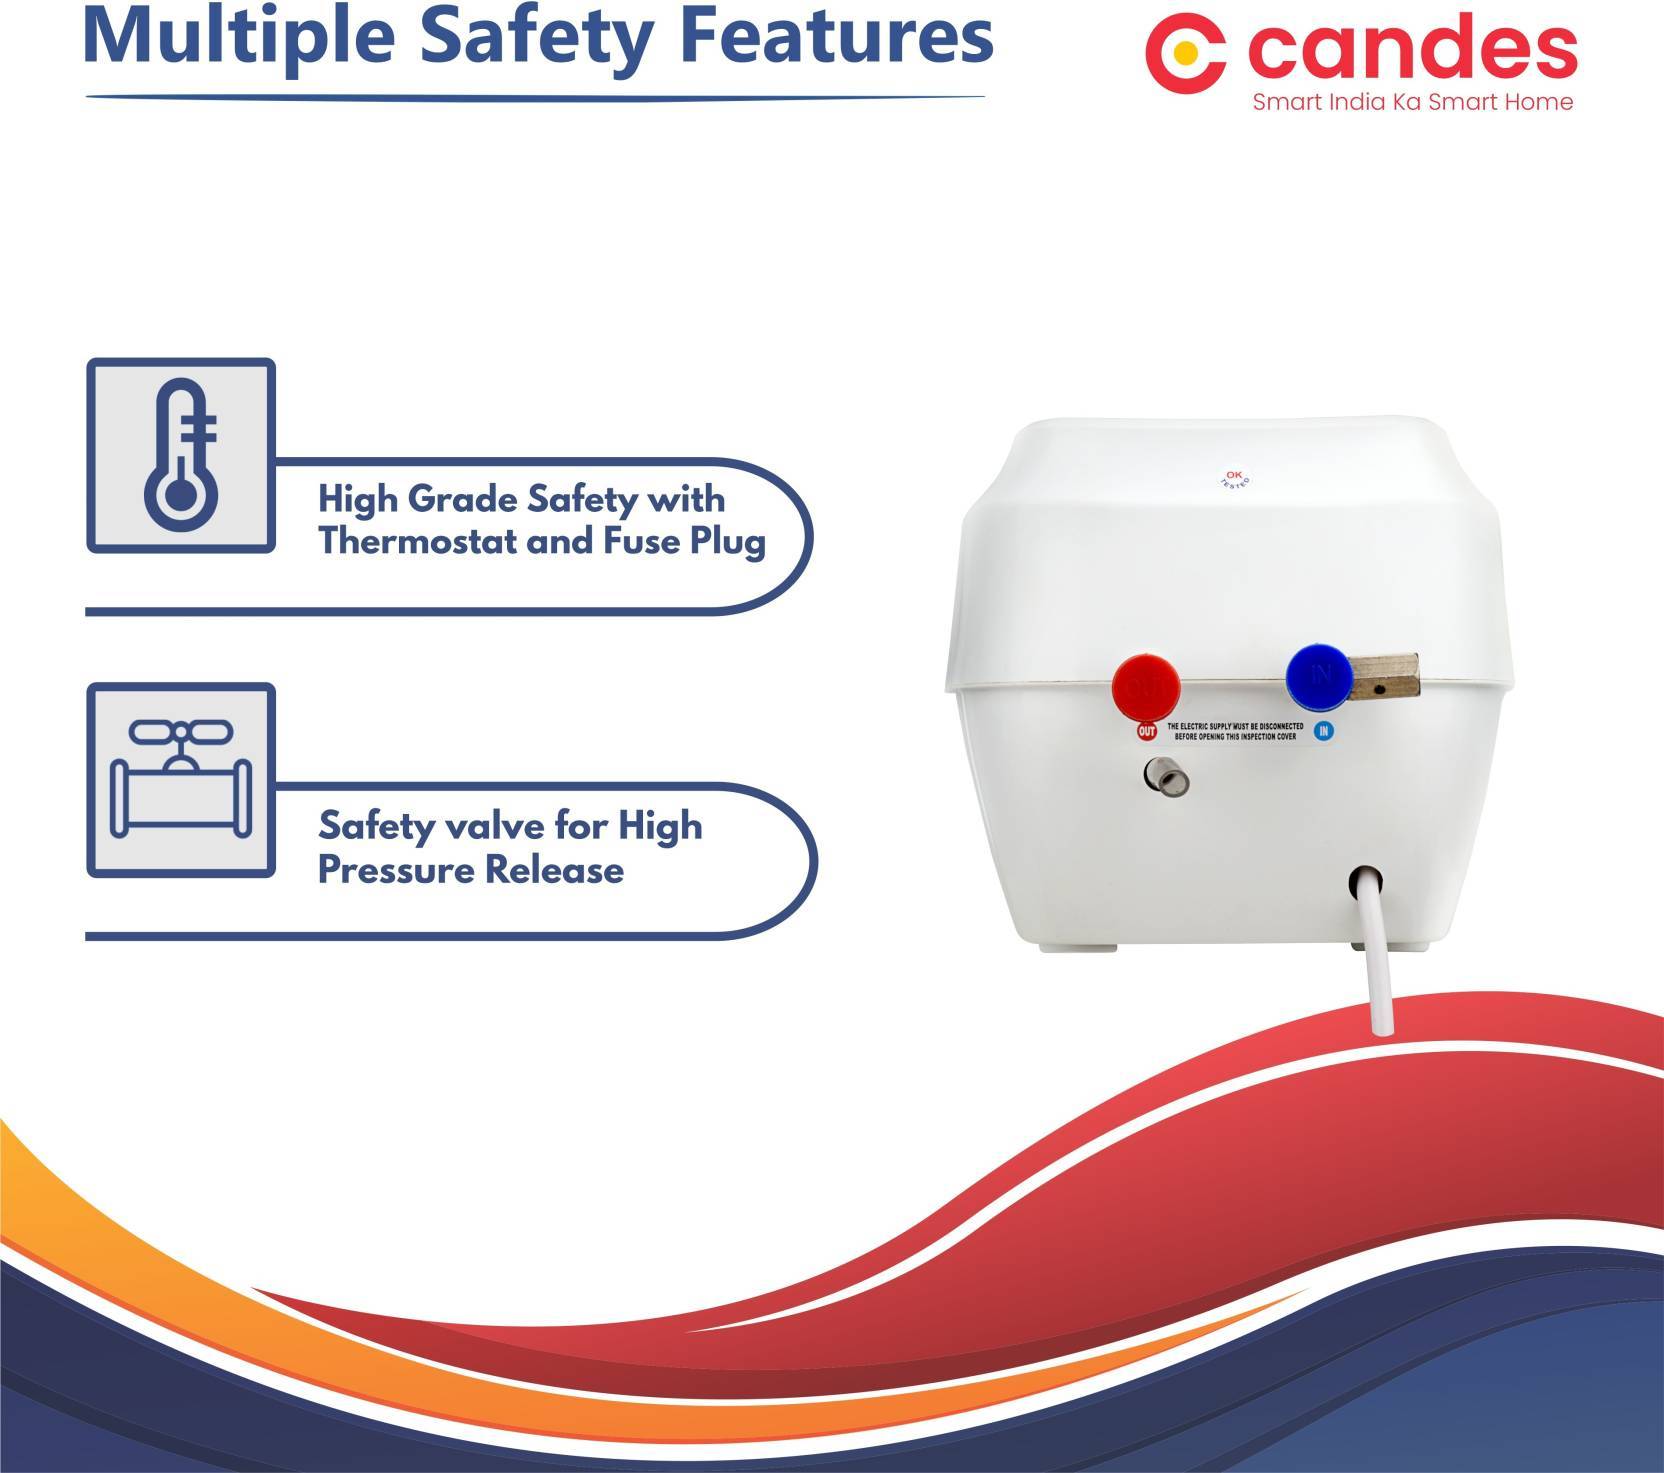 Candes 3 L Instant Water Geyser (Insto, White)